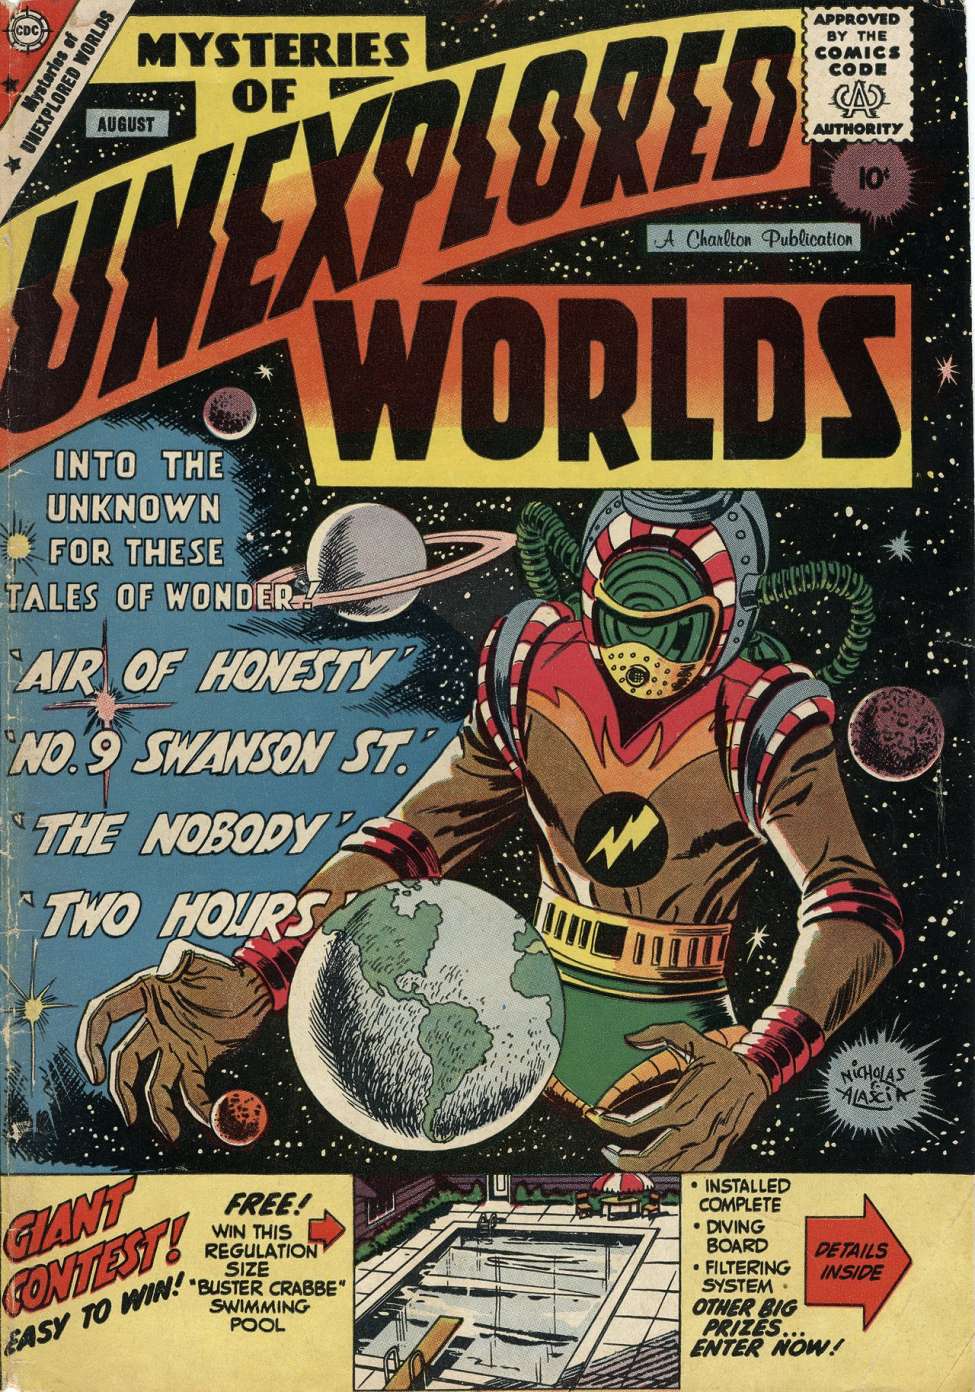 Book Cover For Mysteries of Unexplored Worlds 14